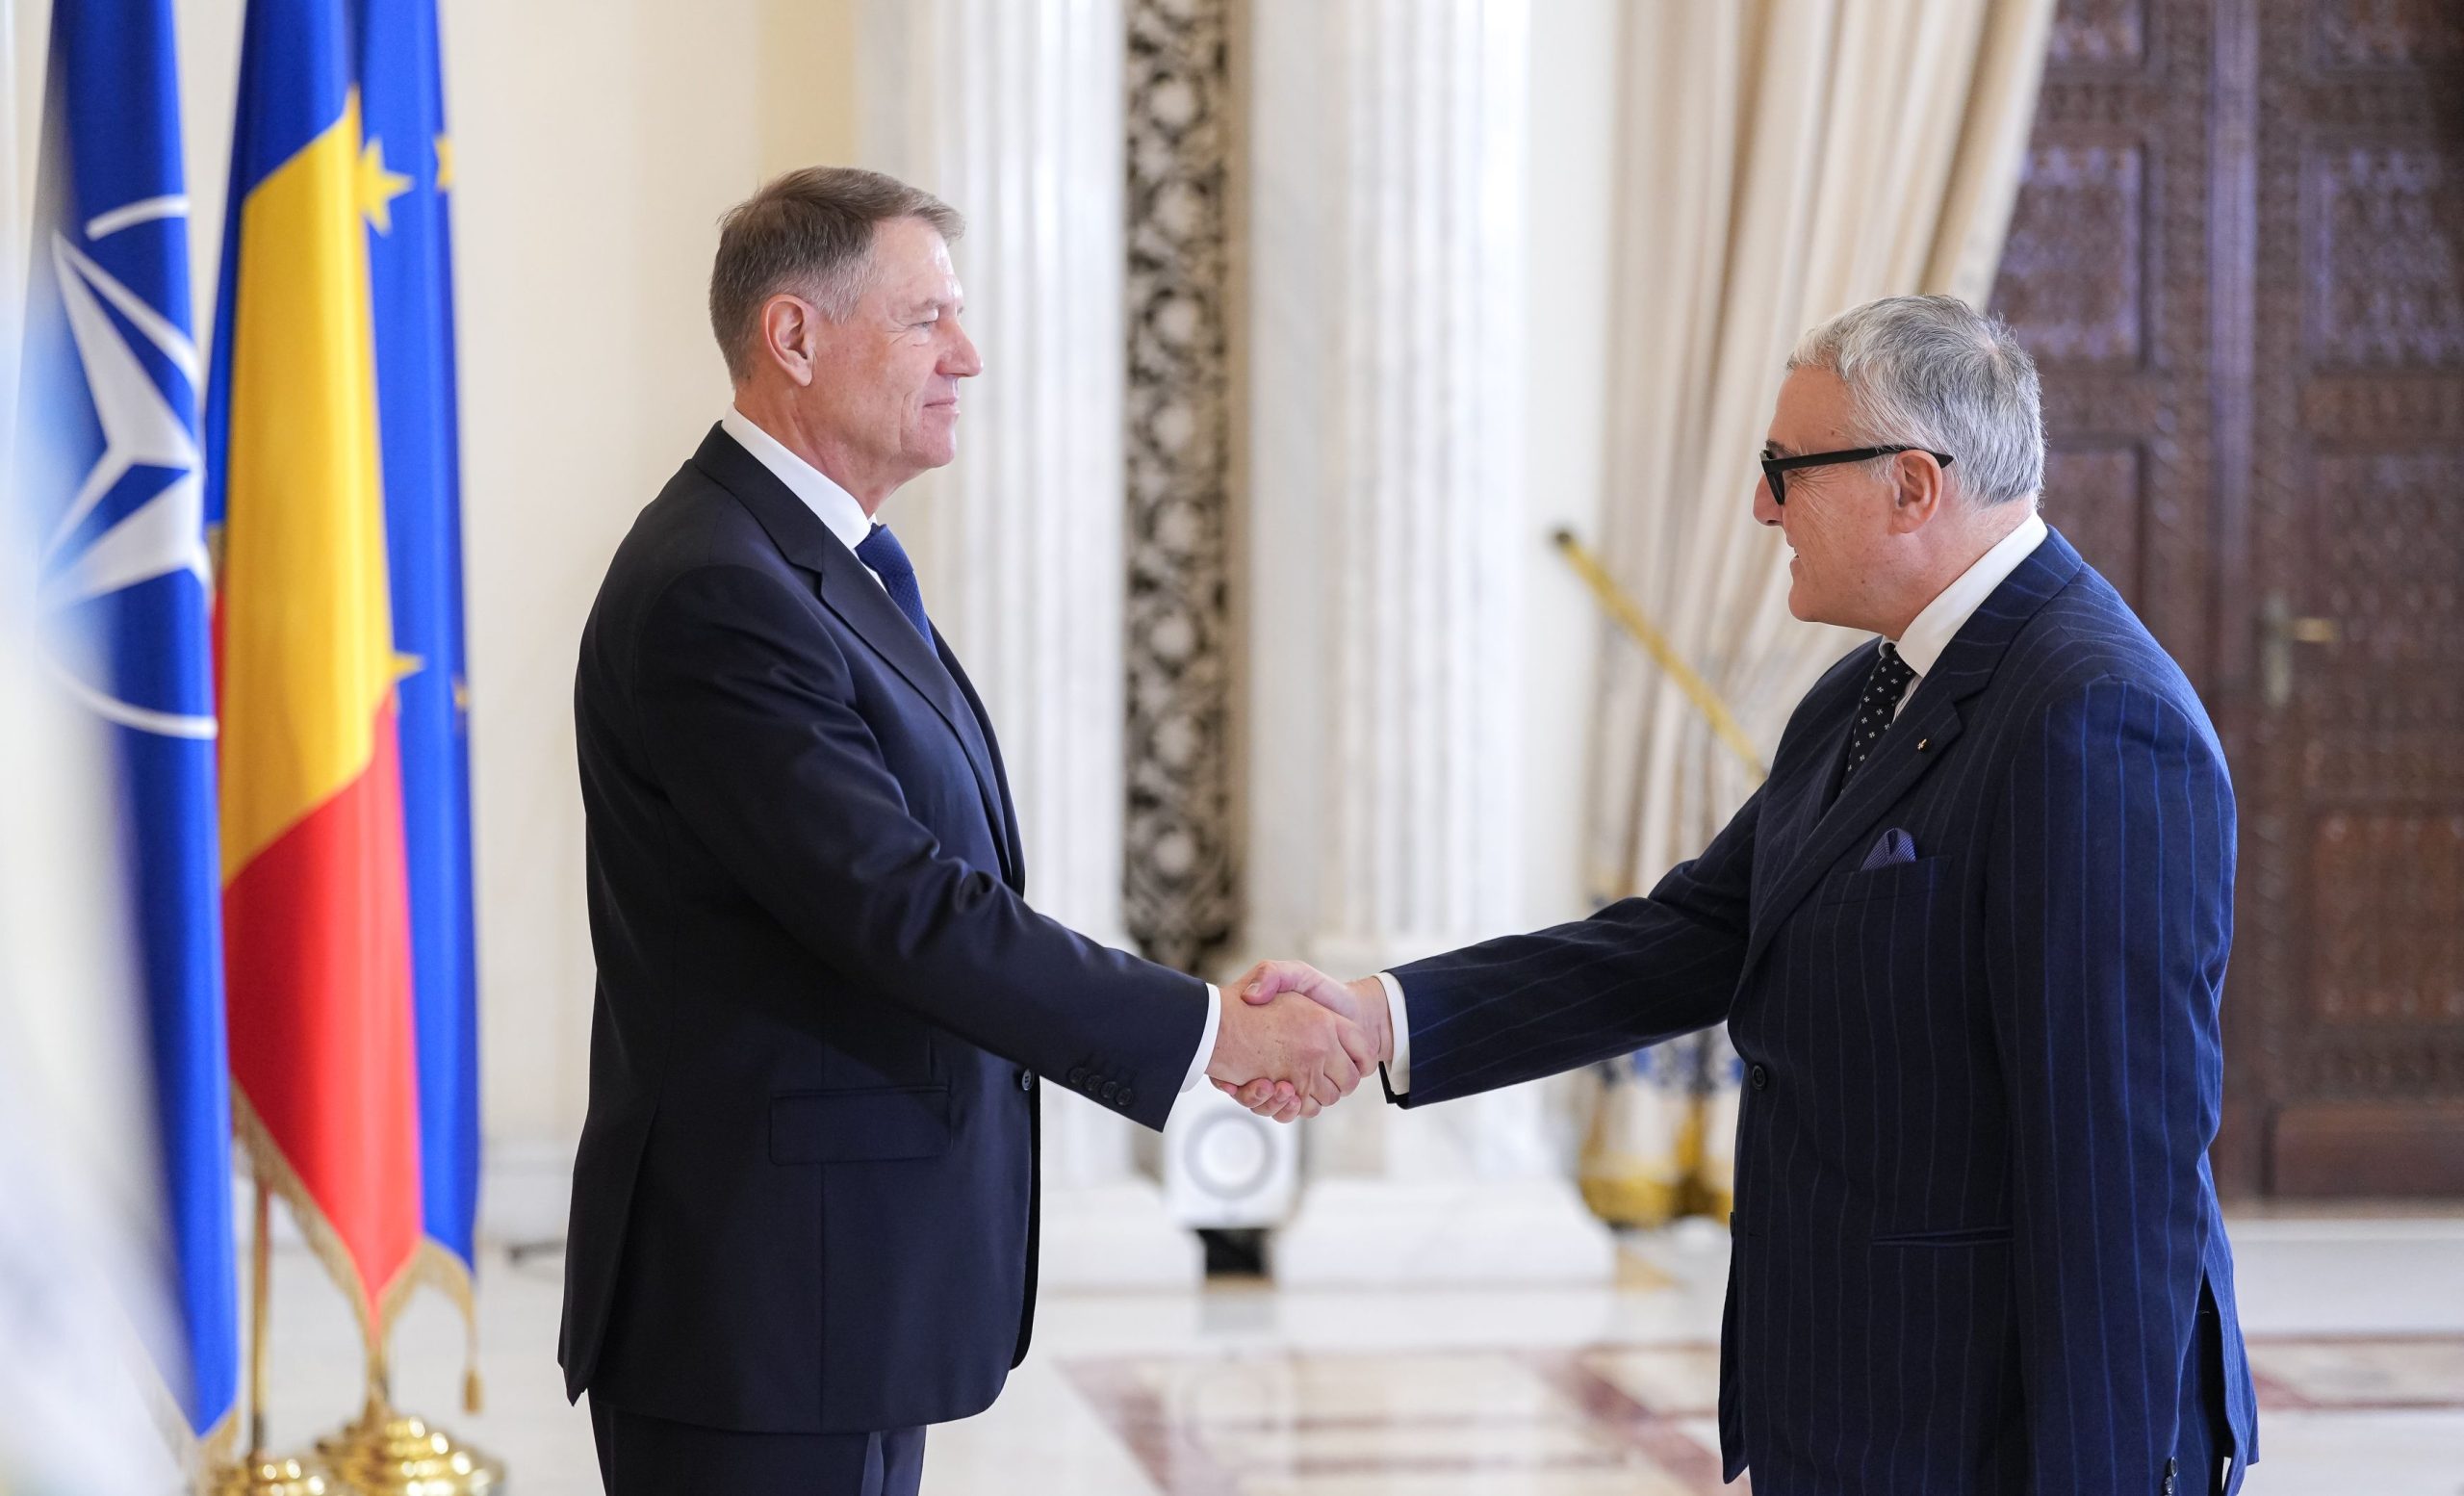 Romanian President Klaus Werner Iohannis meets the diplomatic Corp